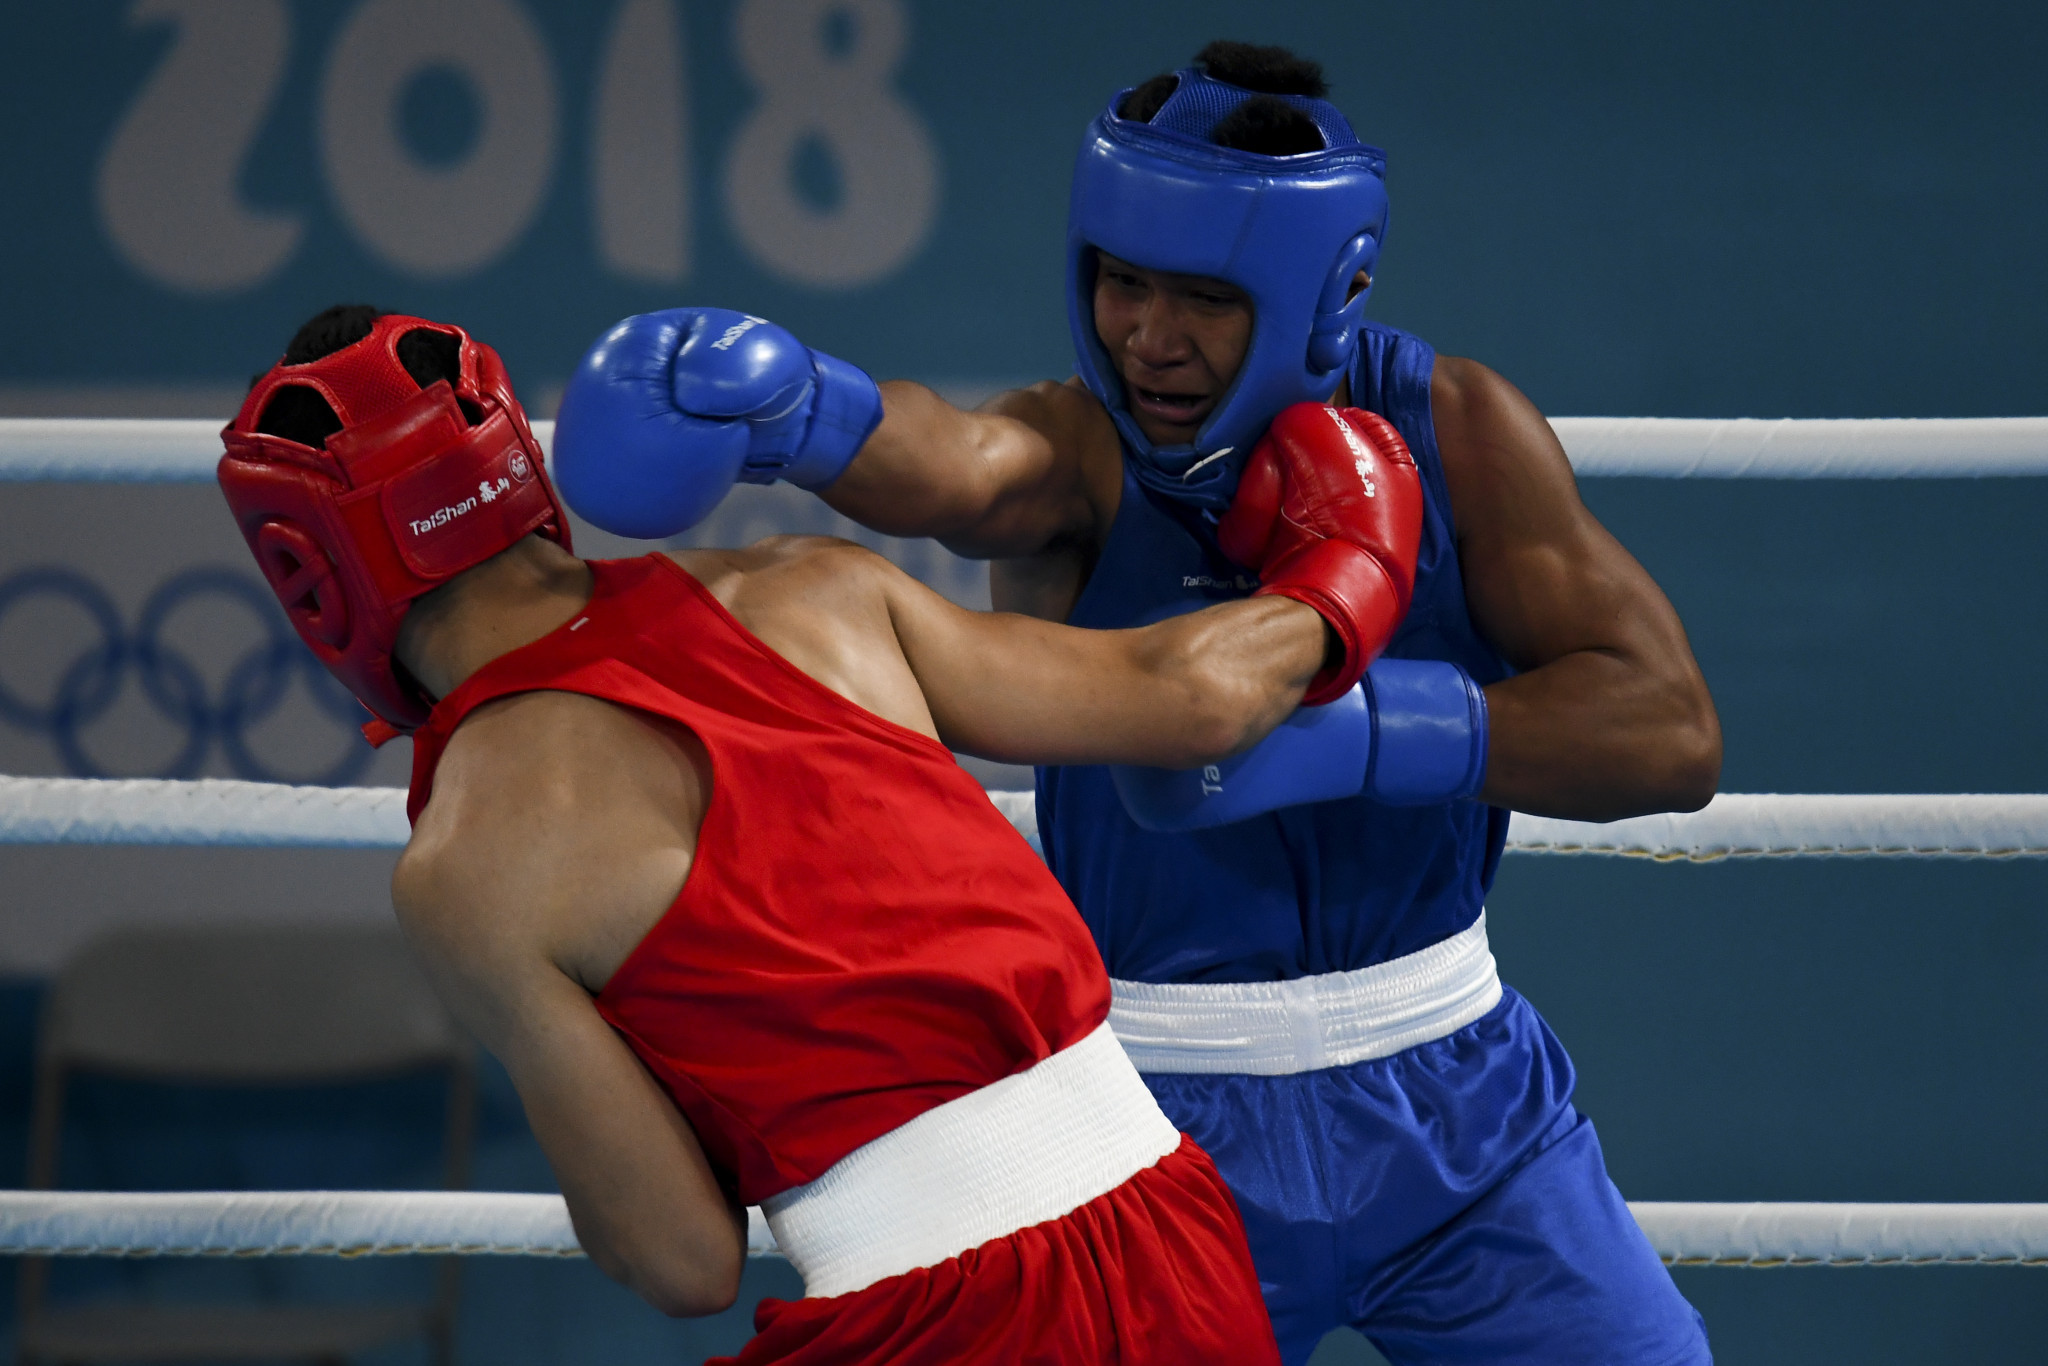 IOC sports director Kit McConnell has claimed there have not been any issues with the boxing event at Buenos Aires 2018 ©Getty Images